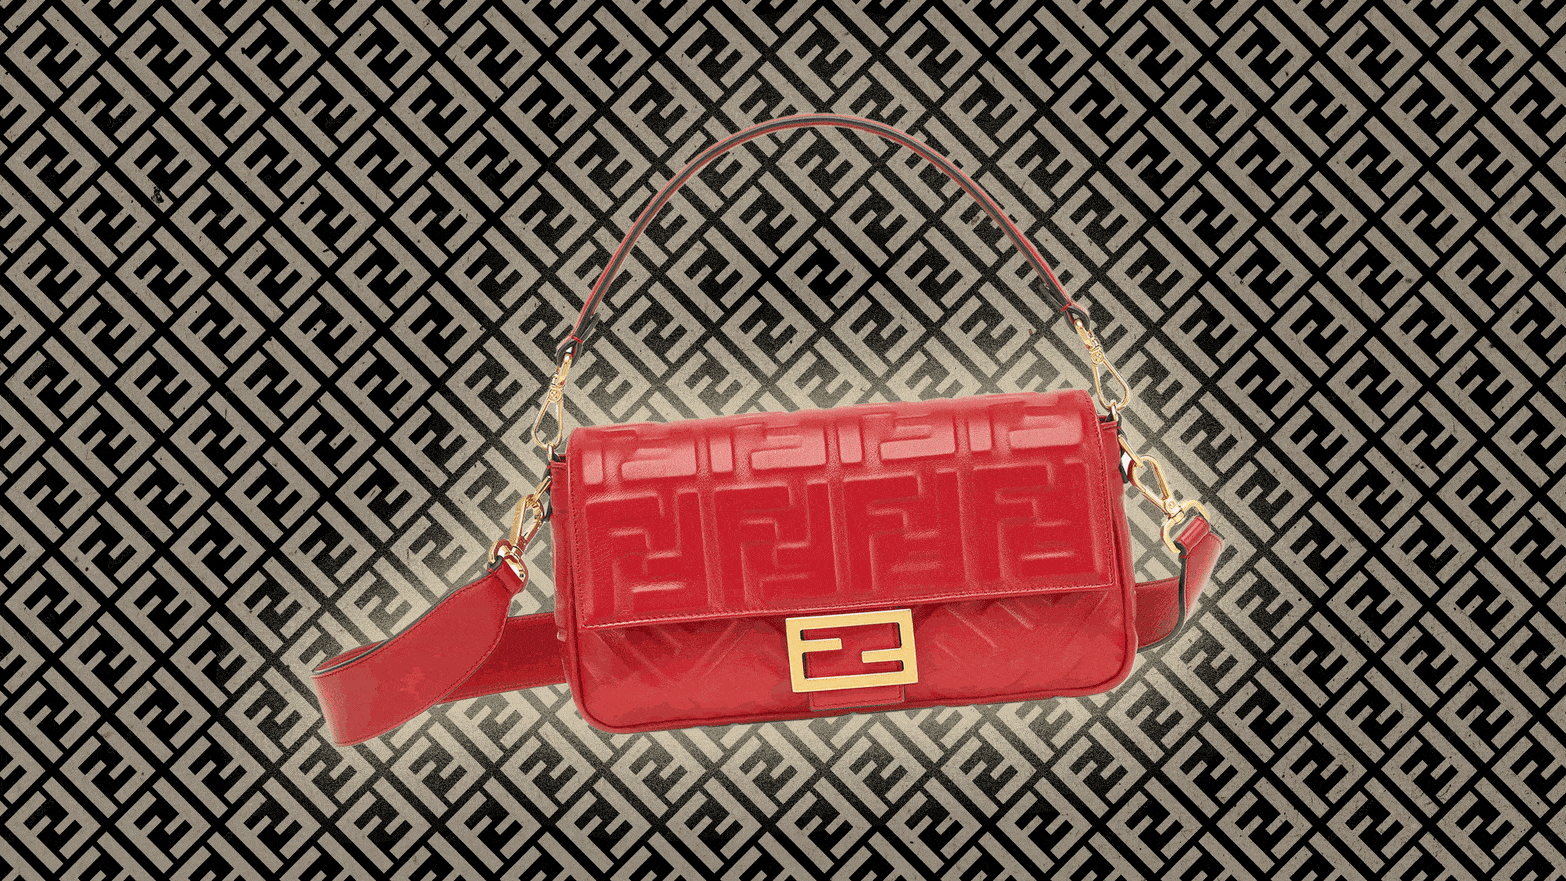 Premium Photo  A colorful bag from the brand fendi.